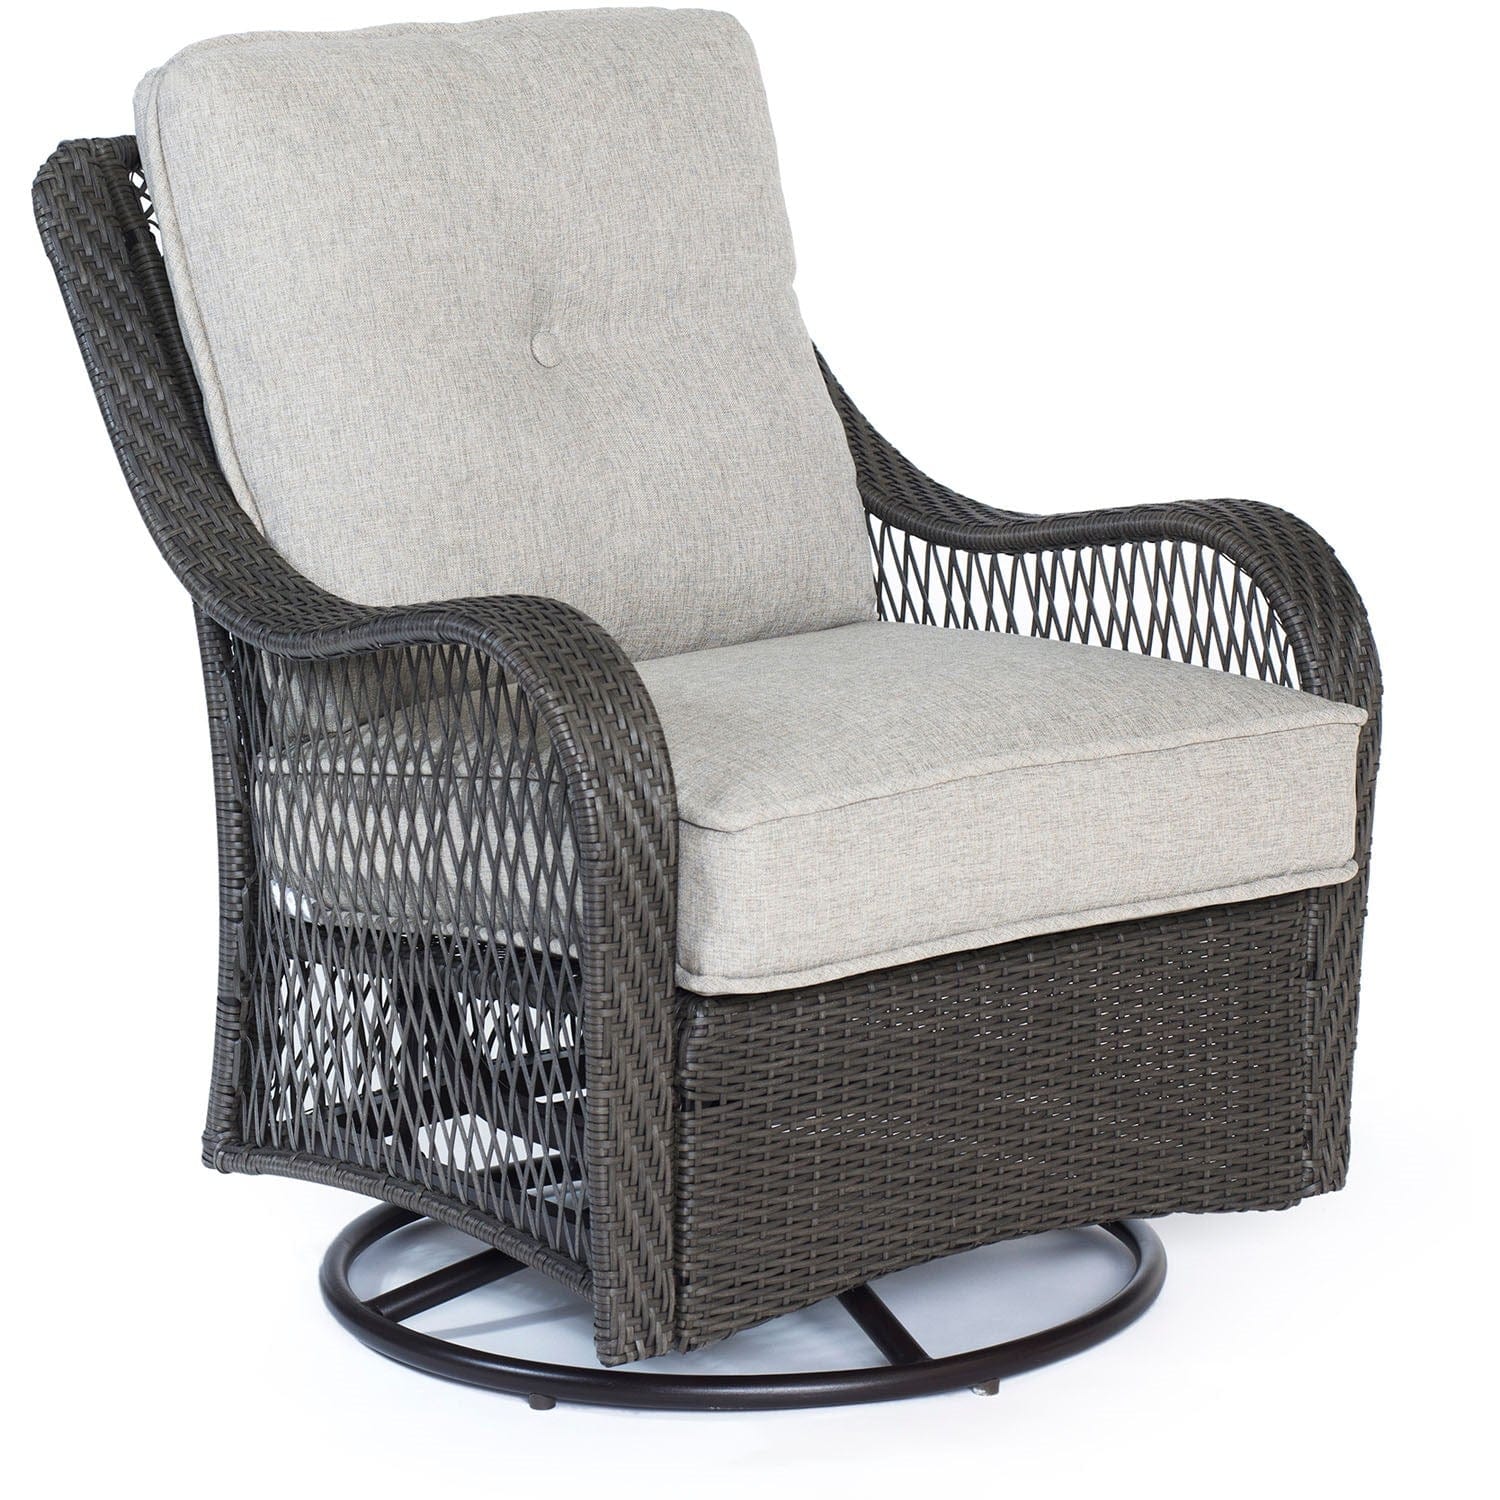 Hanover Conversation Set Hanover Orleans 3-Piece Swivel Gliding Chat Set in Heather Gray with Gray Weave